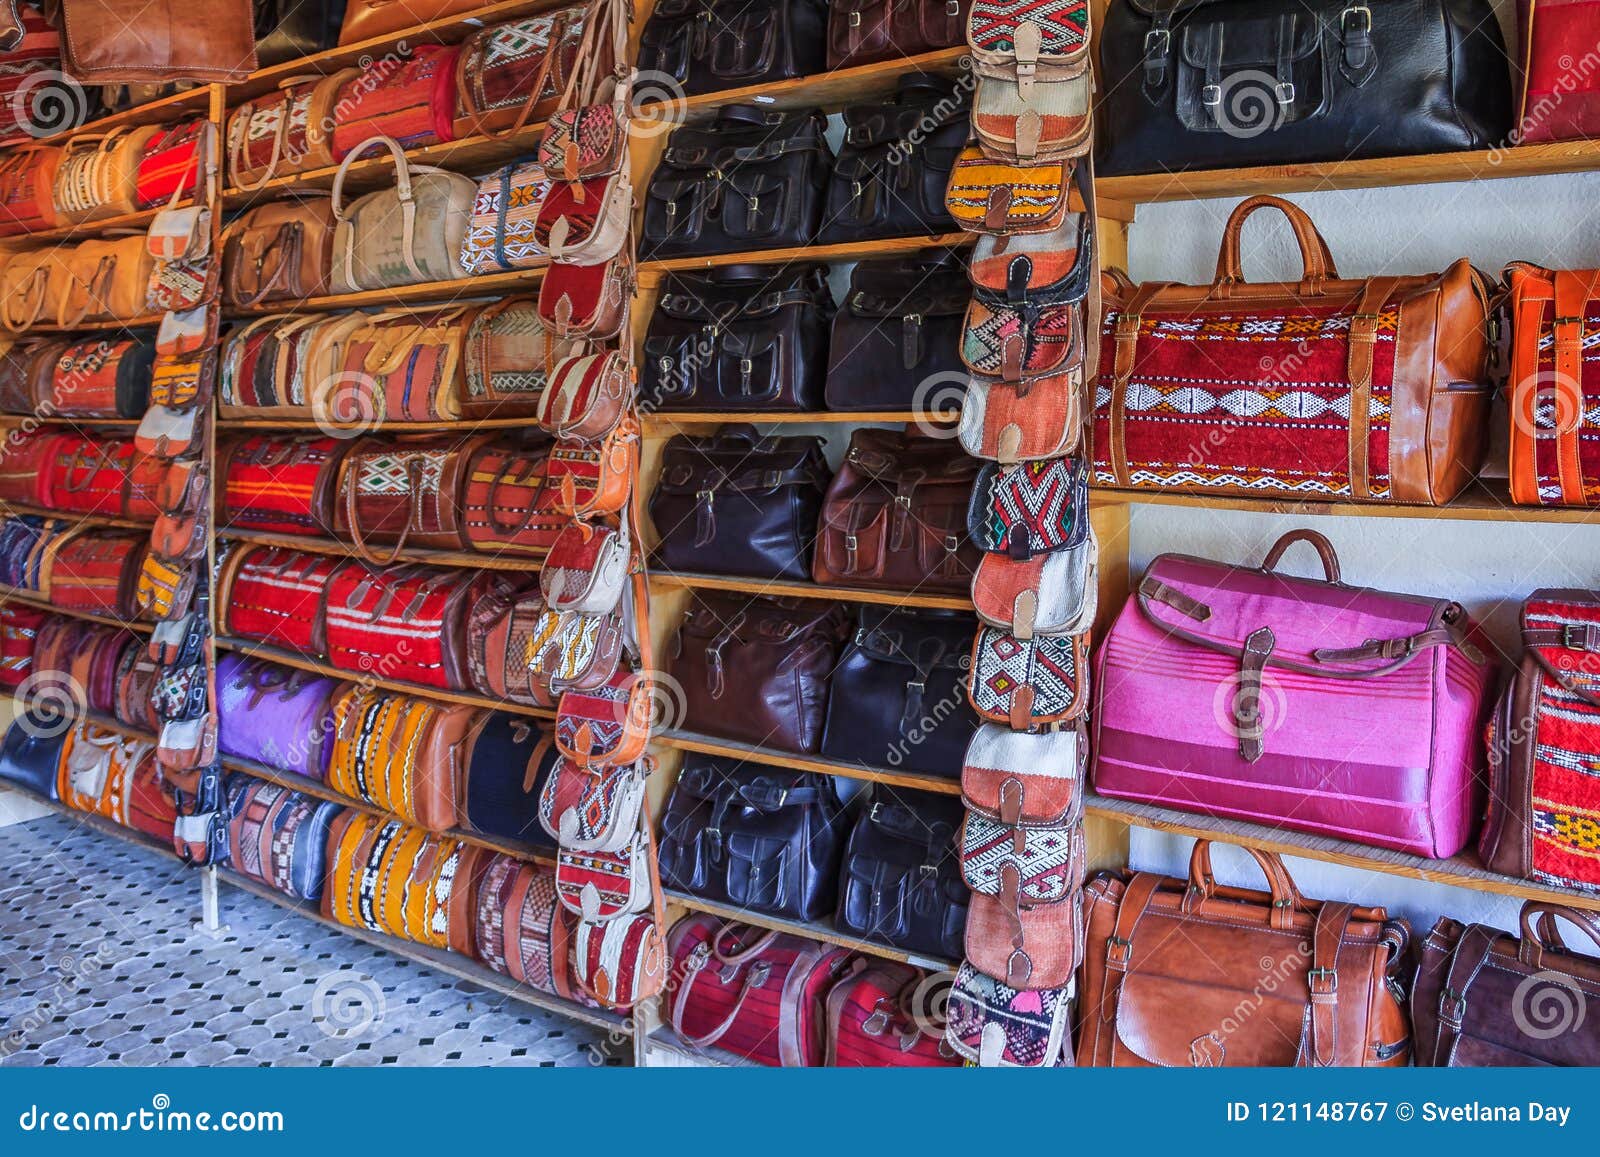 Update 69+ moroccan leather bags latest - in.duhocakina